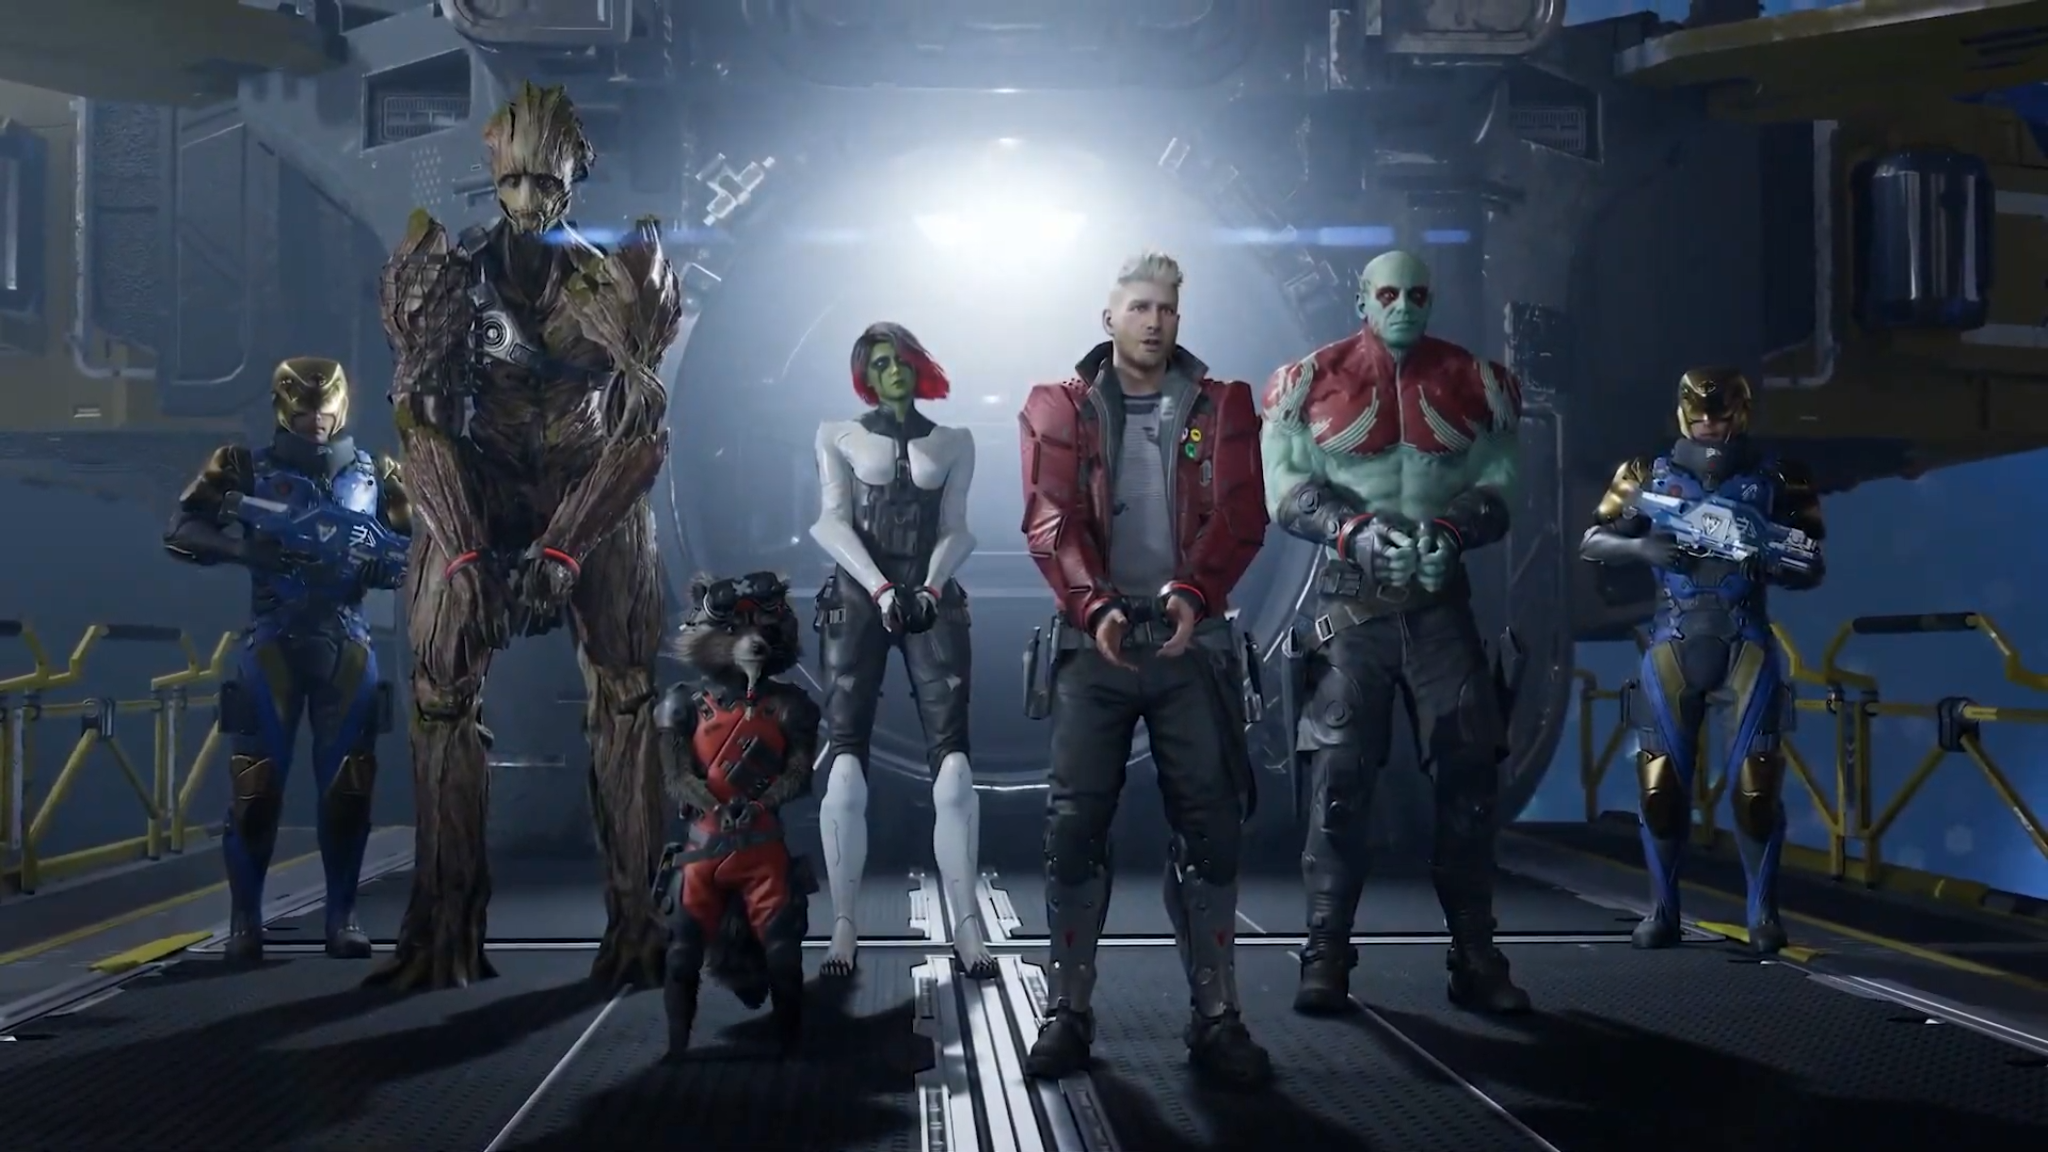 Square Enix reveals Guardians of the Galaxy game at E3 2021. Tom's Guide